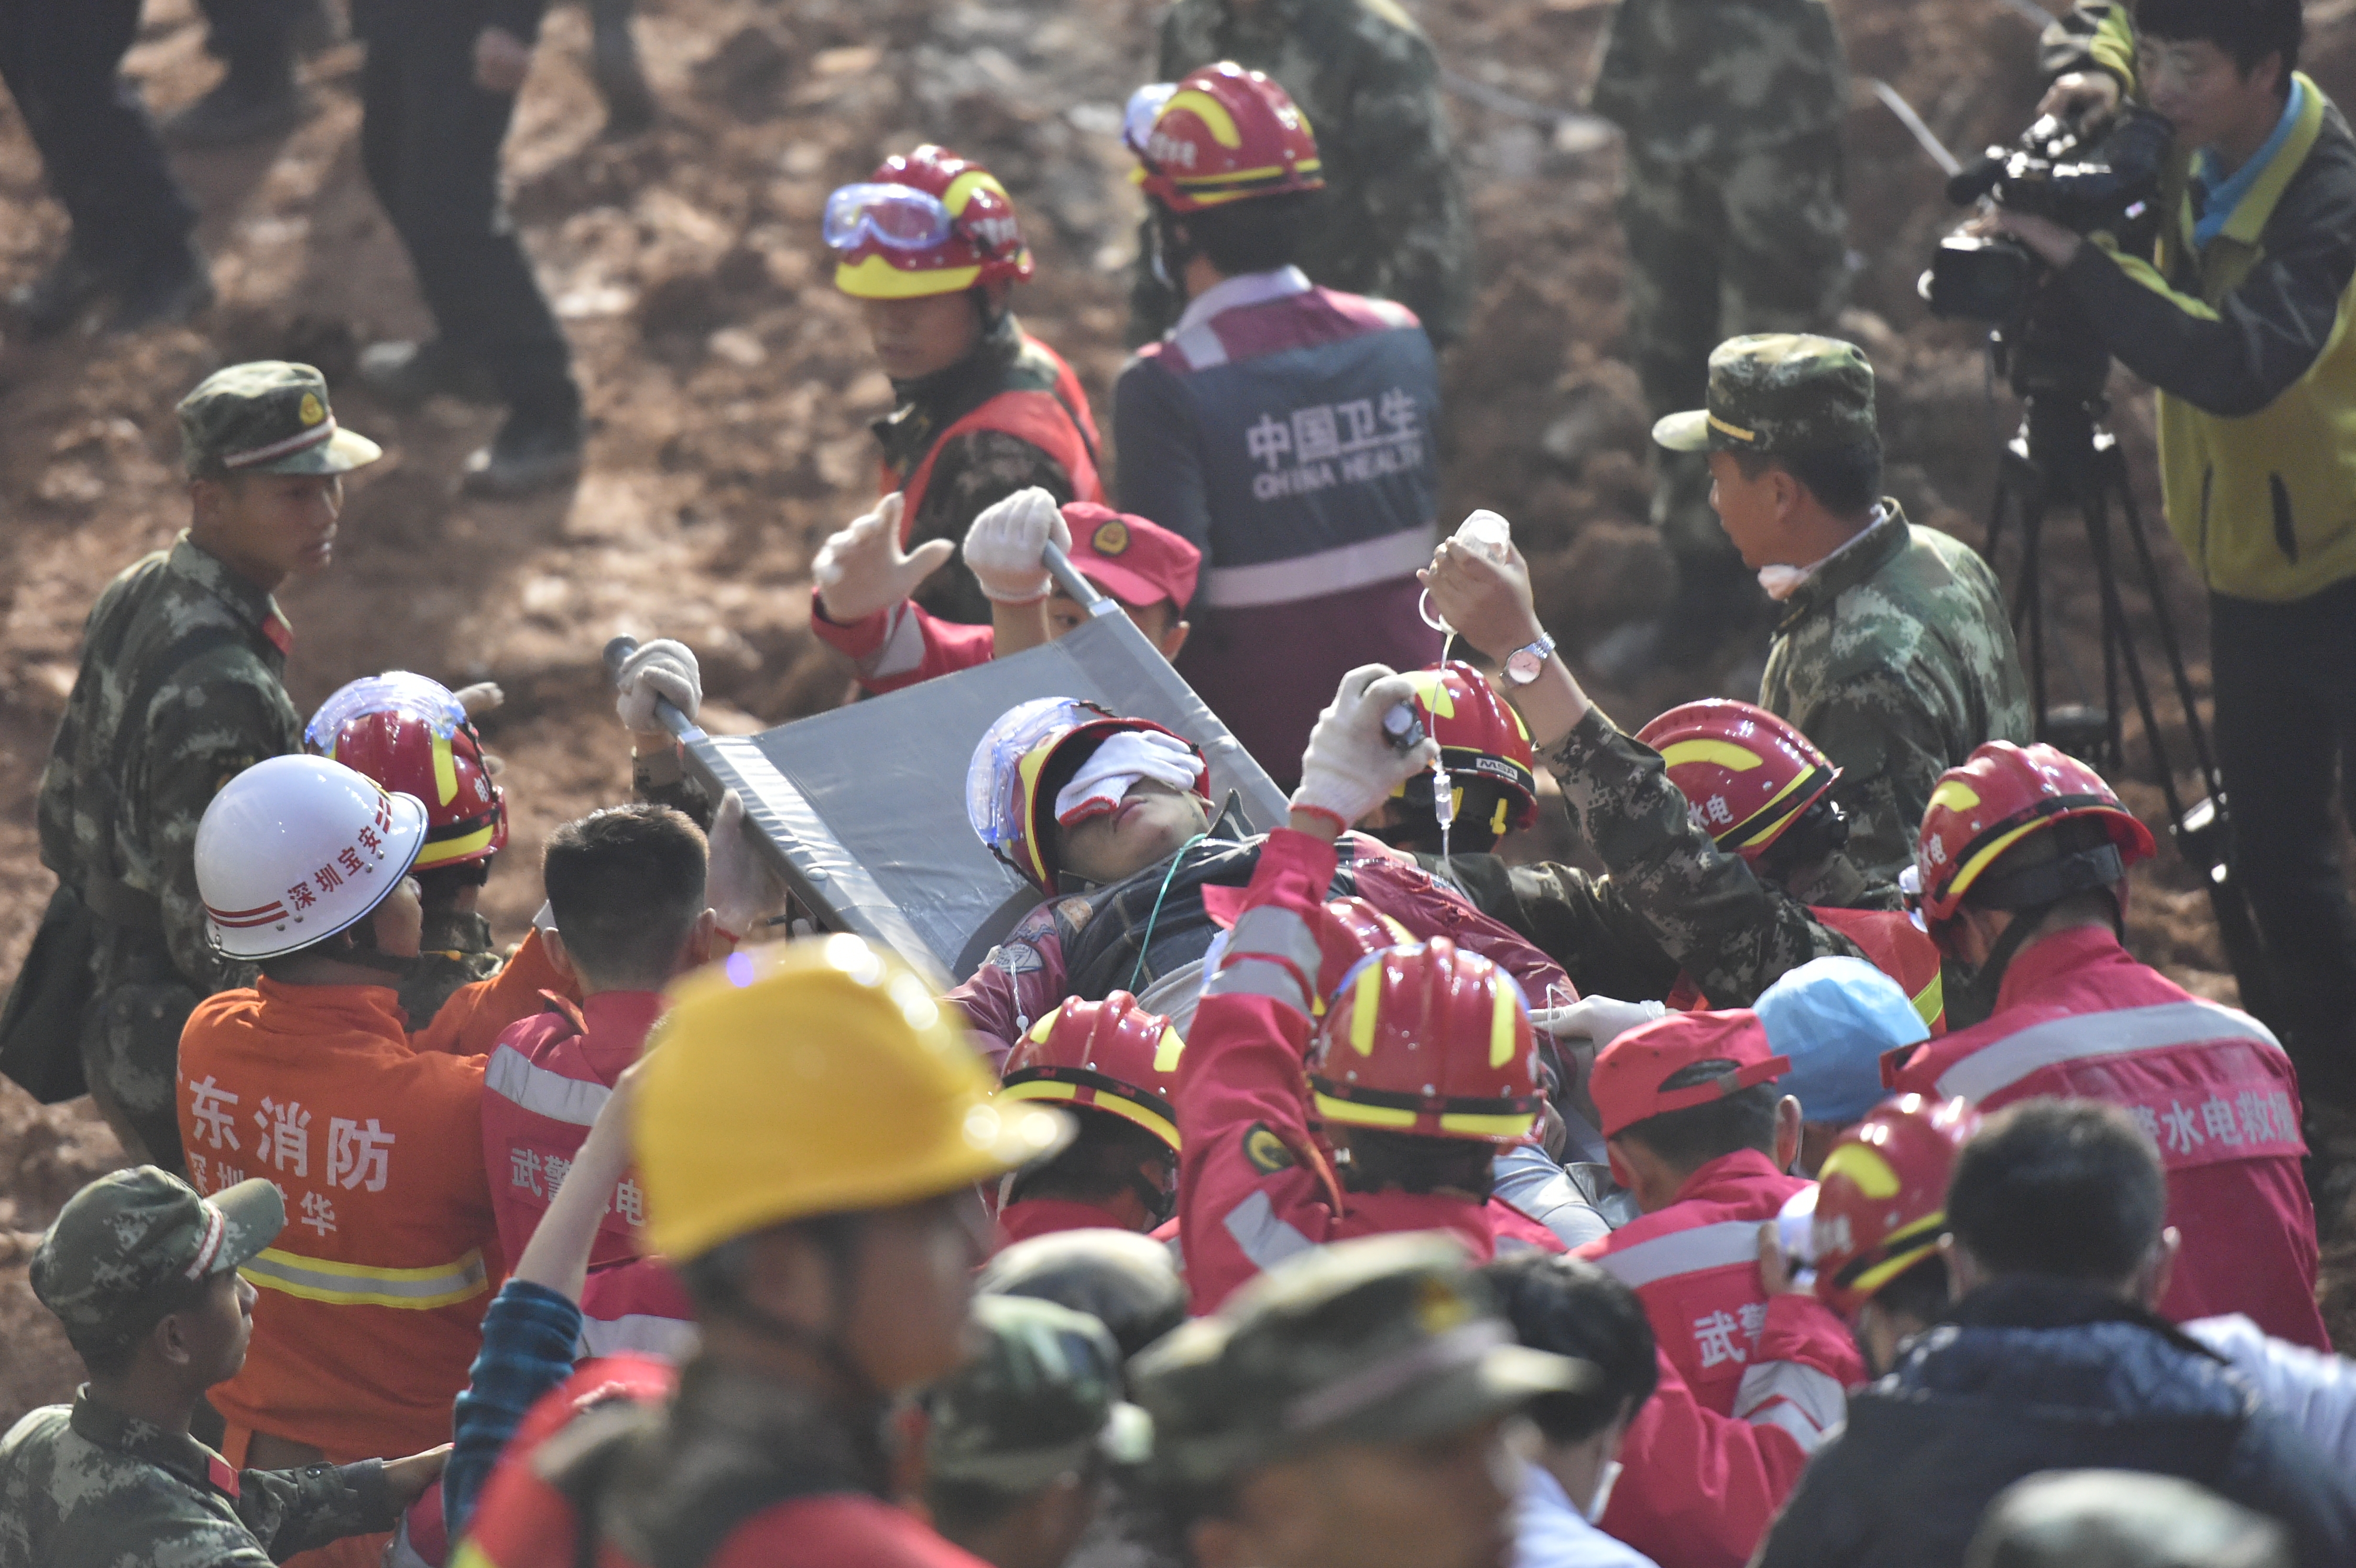 (151223) -- SHENZHEN, Dec. 23, 2015 (Xinhua) -- A survivor is found at the site of landslide at an industrial park in Shenzhen, south China's Guangdong Province, Dec. 23, 2015. One man was pulled out alive early Wednesday morning more than 60 hours after a landslide in Shenzhen.  (Xinhua/Liang Xu) (lfj)